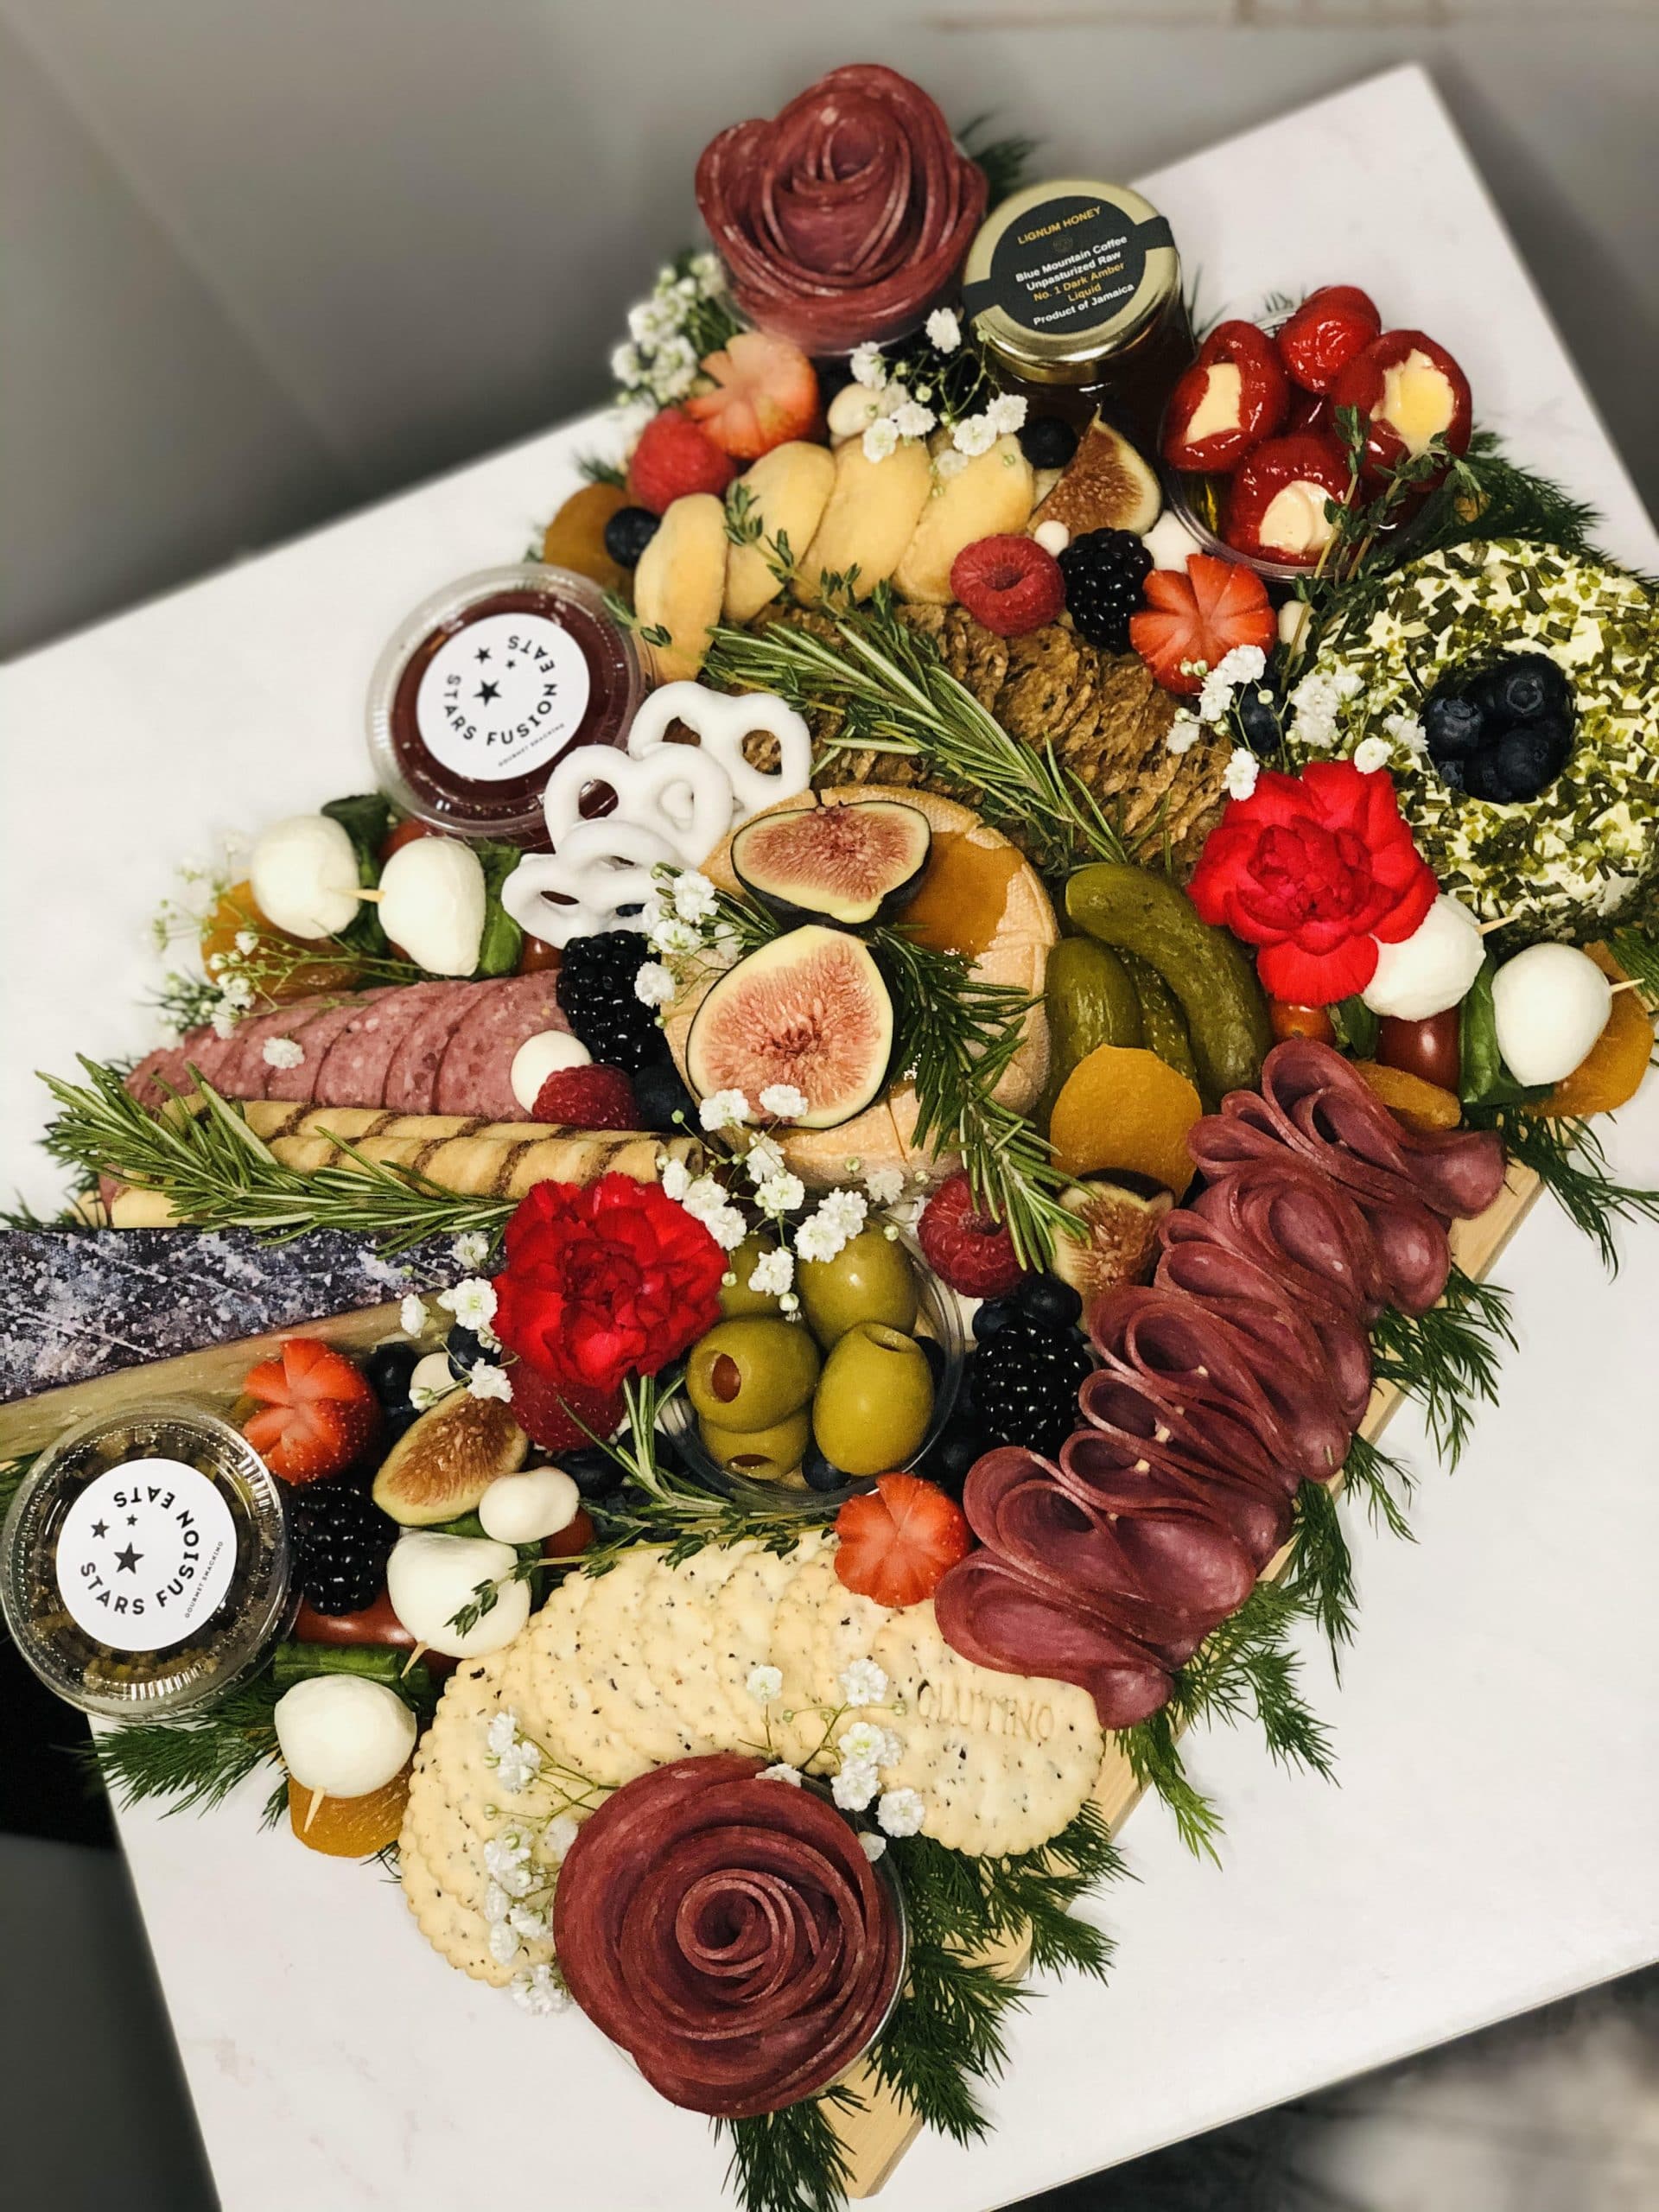 Large Charcuterie Board Stars Fusion Eats 2021 scaled